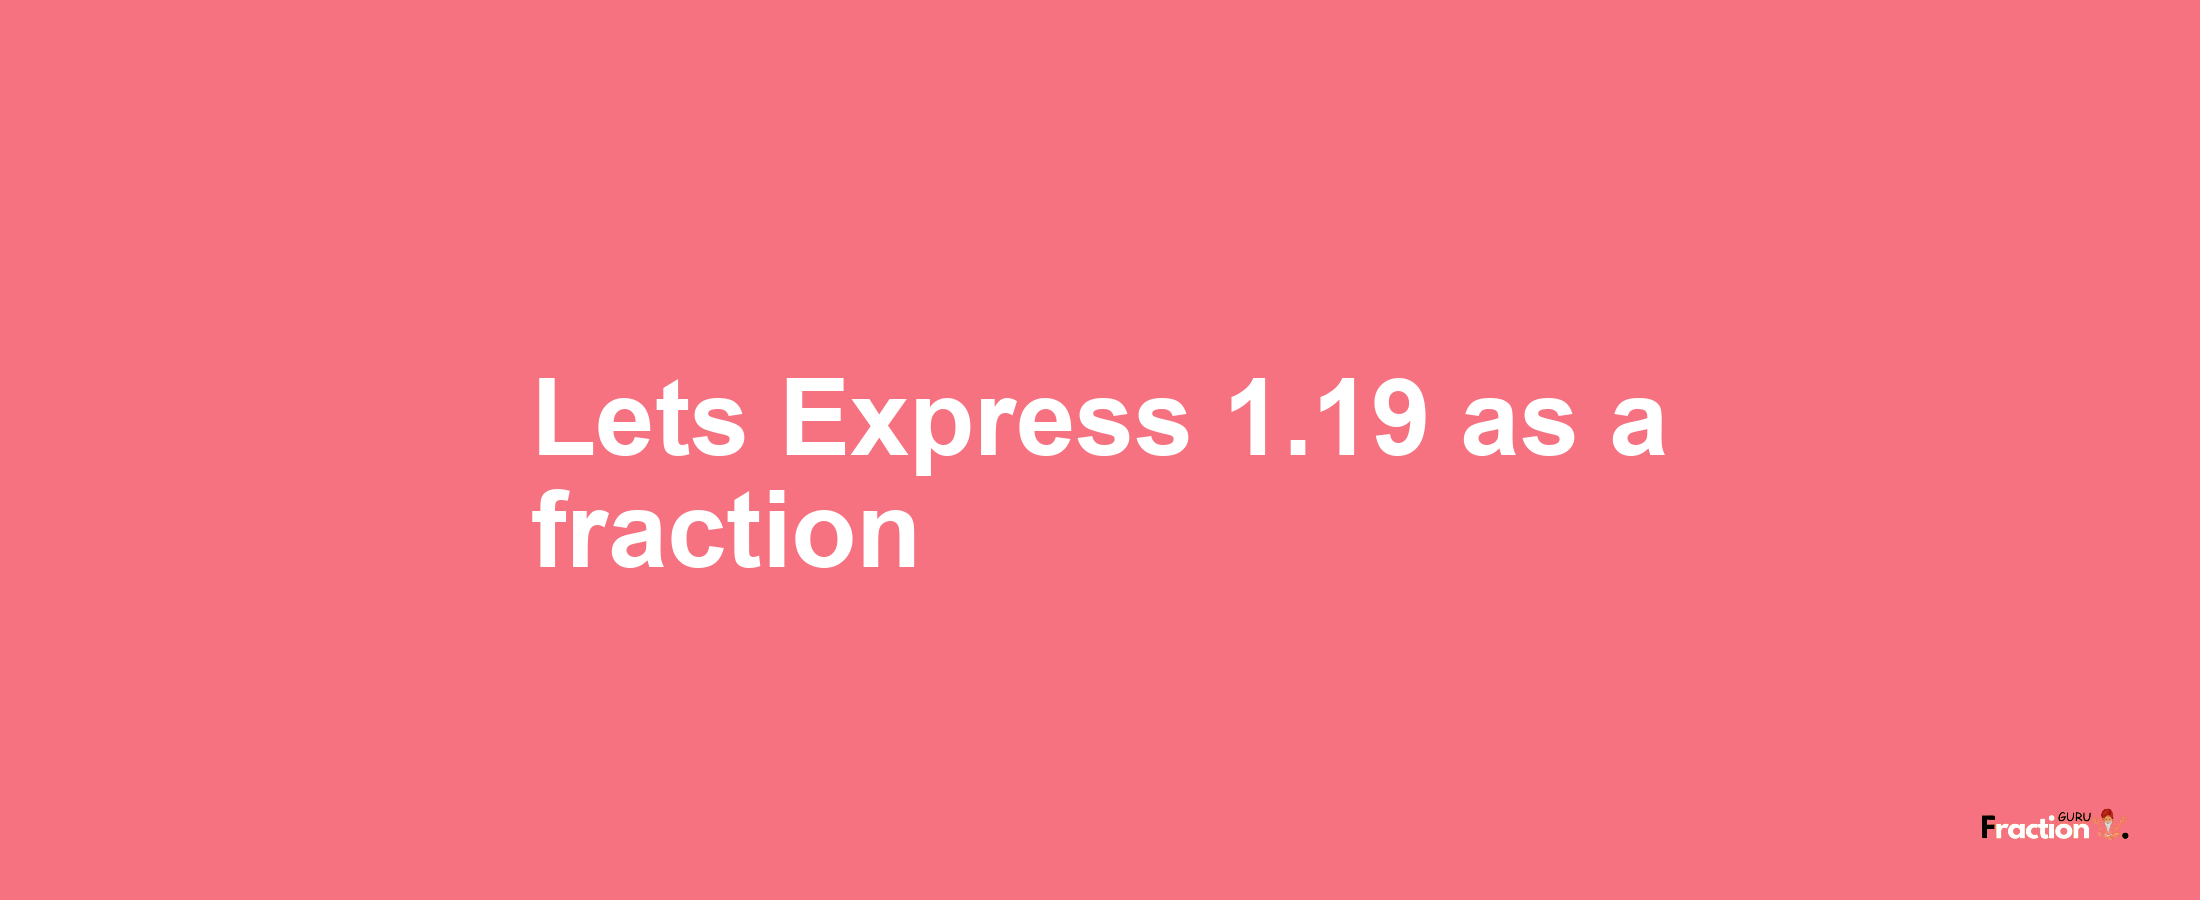 Lets Express 1.19 as afraction